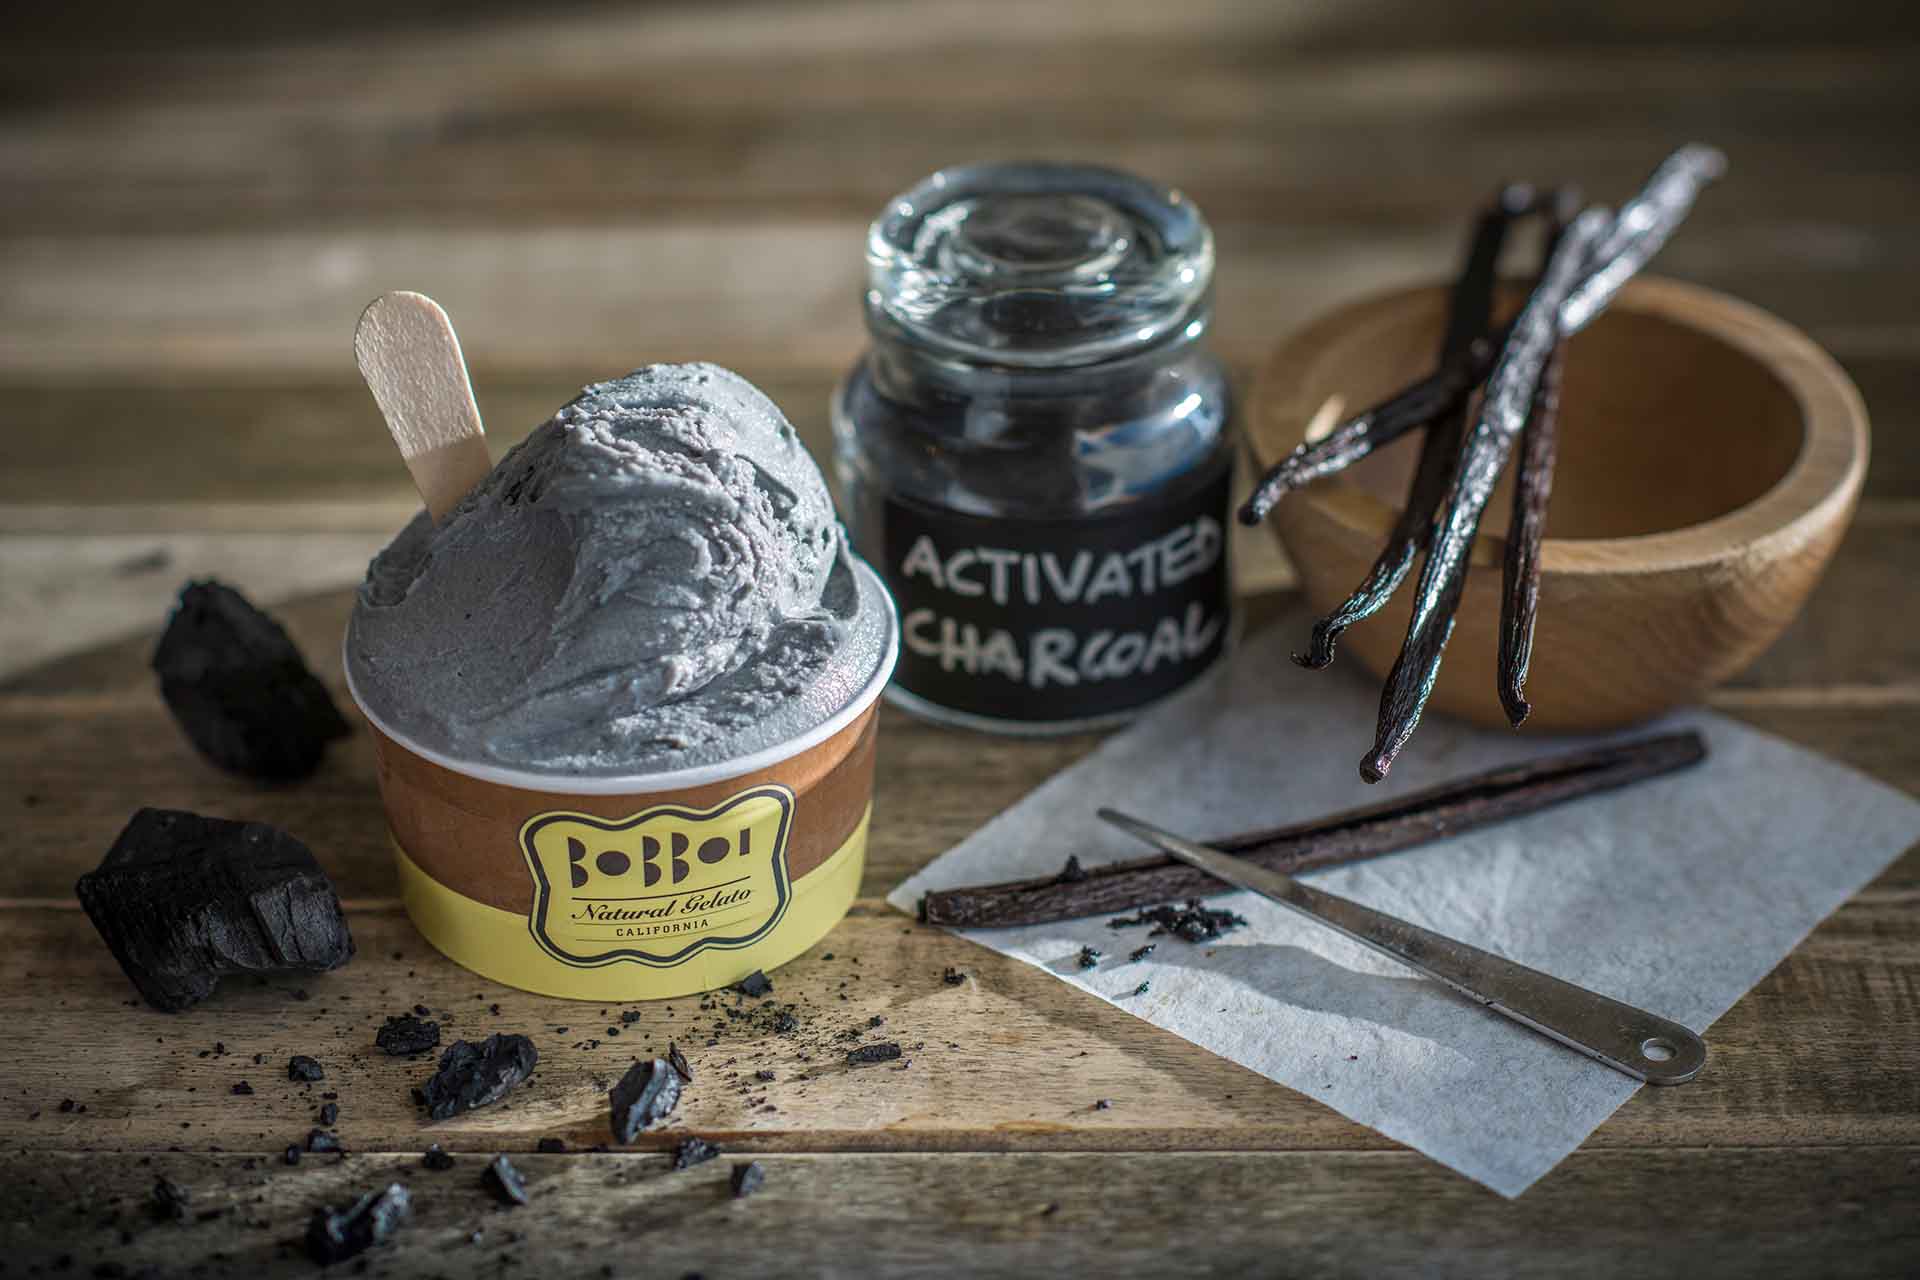 activated charcoal straus ice cream